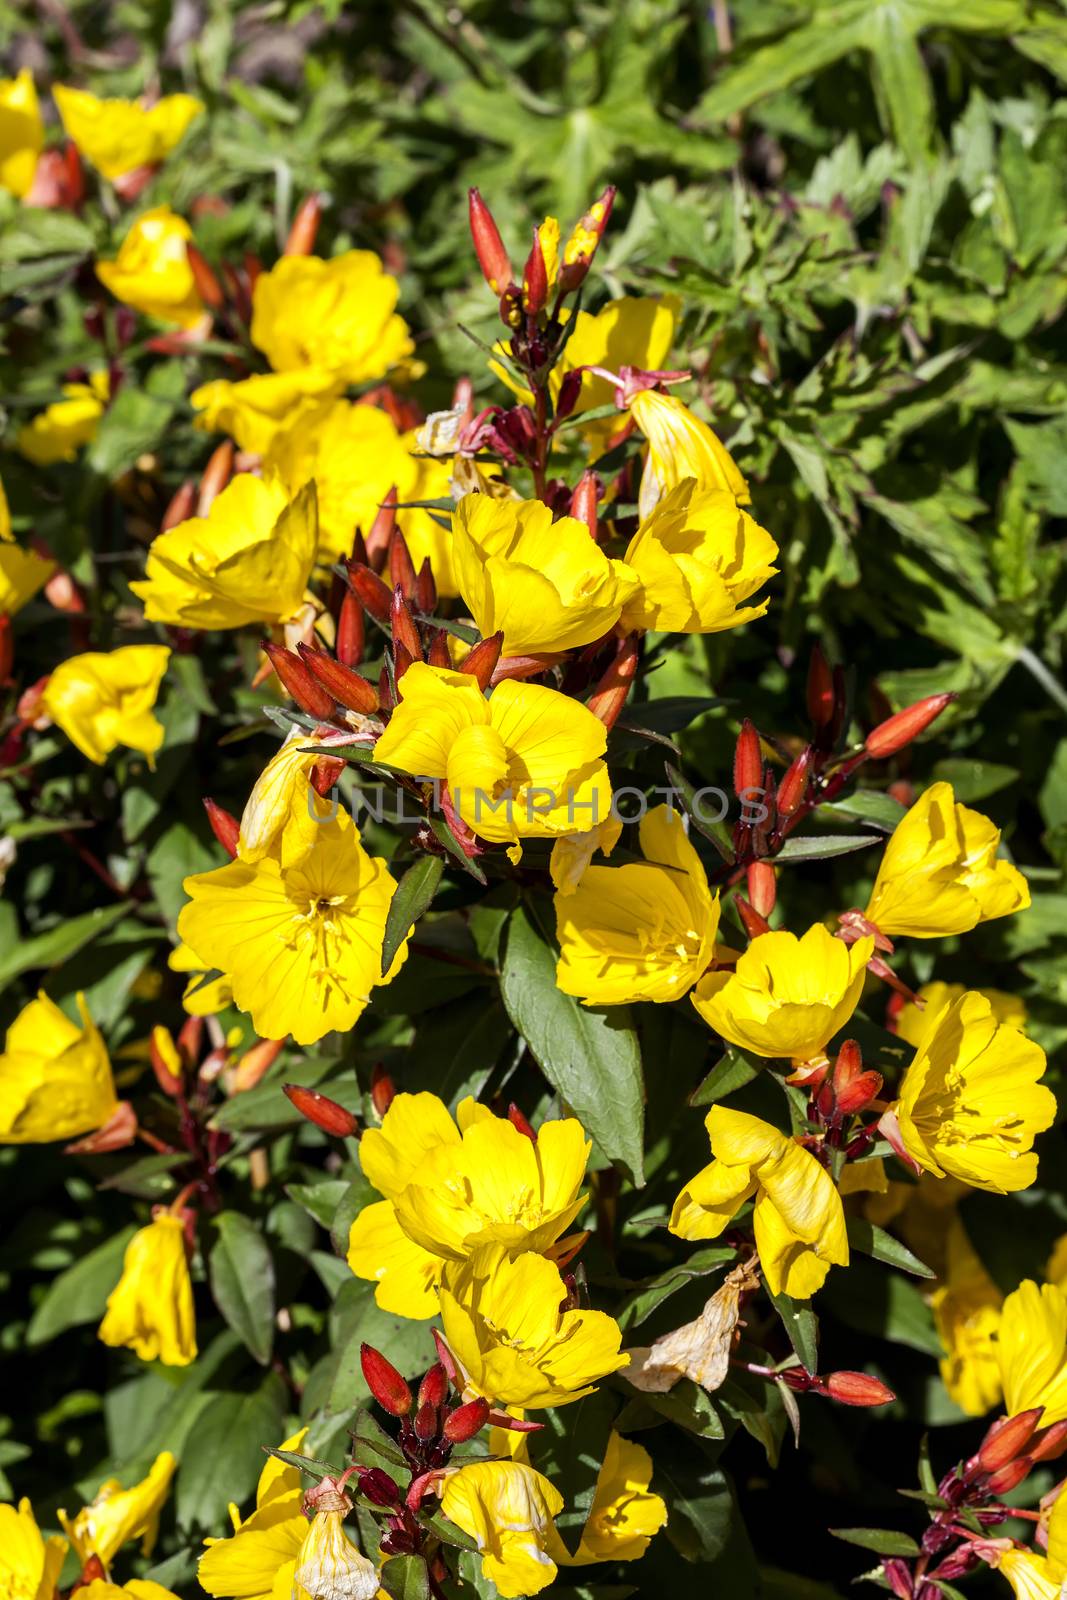 Oenothera 'Erica Robin' a yellow herbaceous springtime summer flower plant commonly known as evening primrose